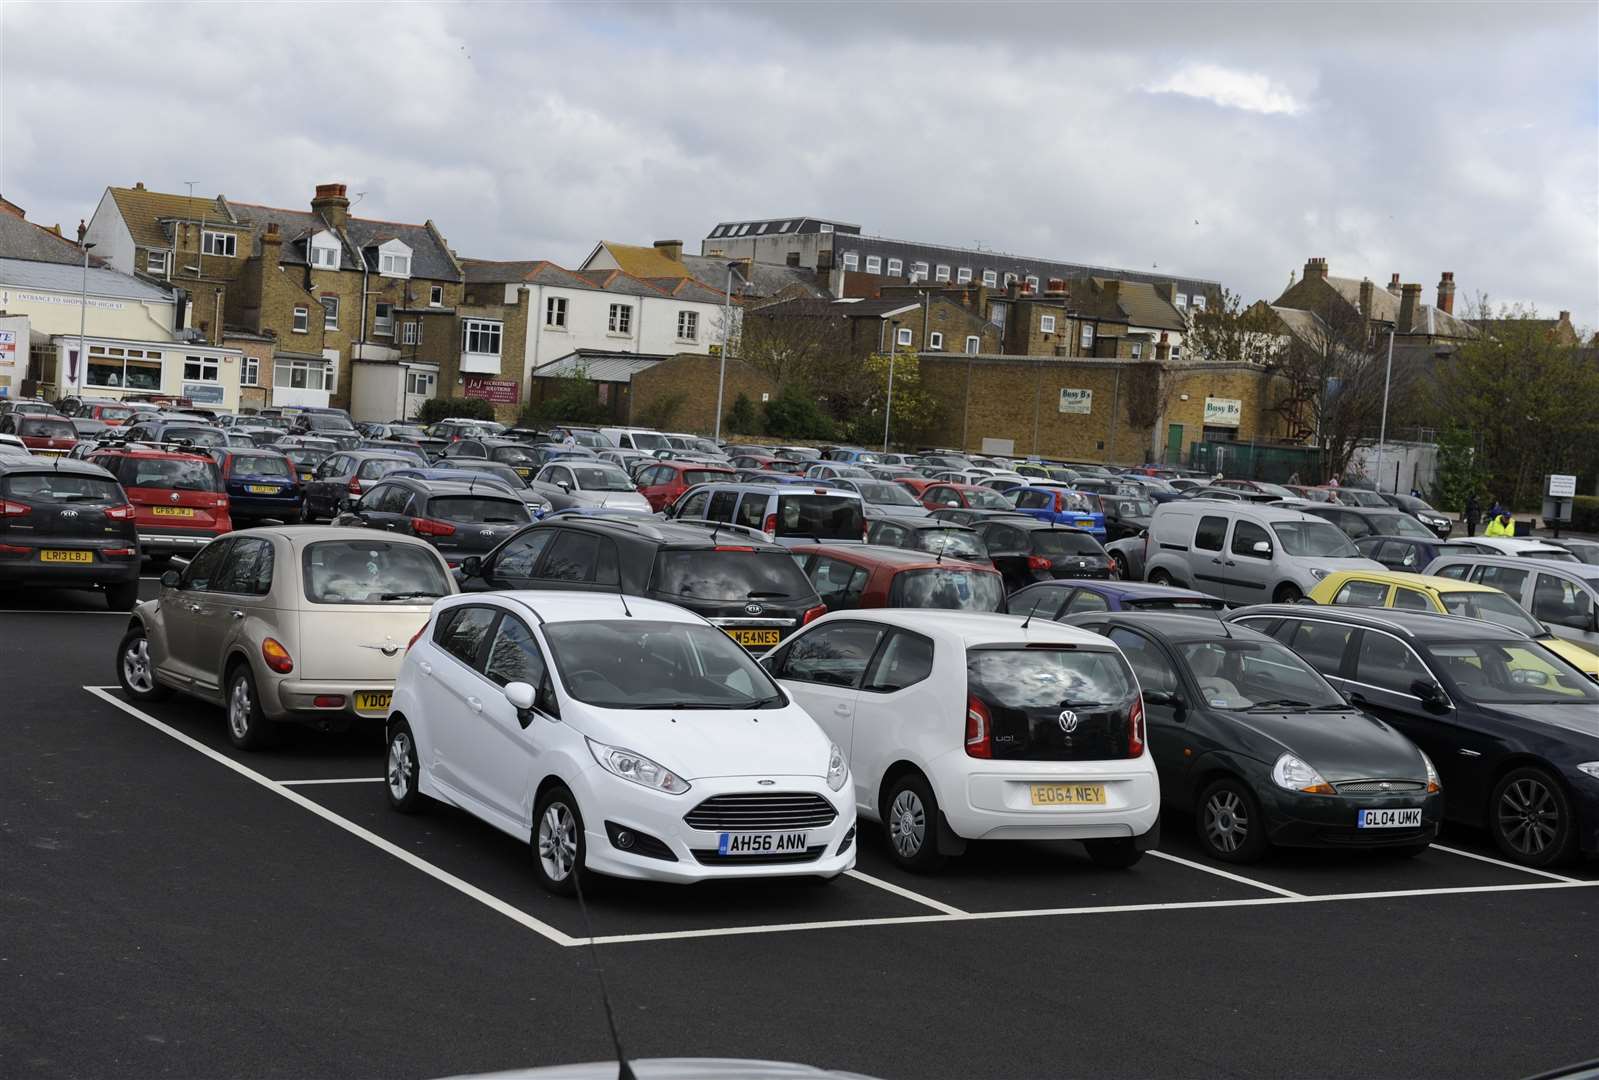 Free evening parking will end in William Street car park in Herne Bay from April 1